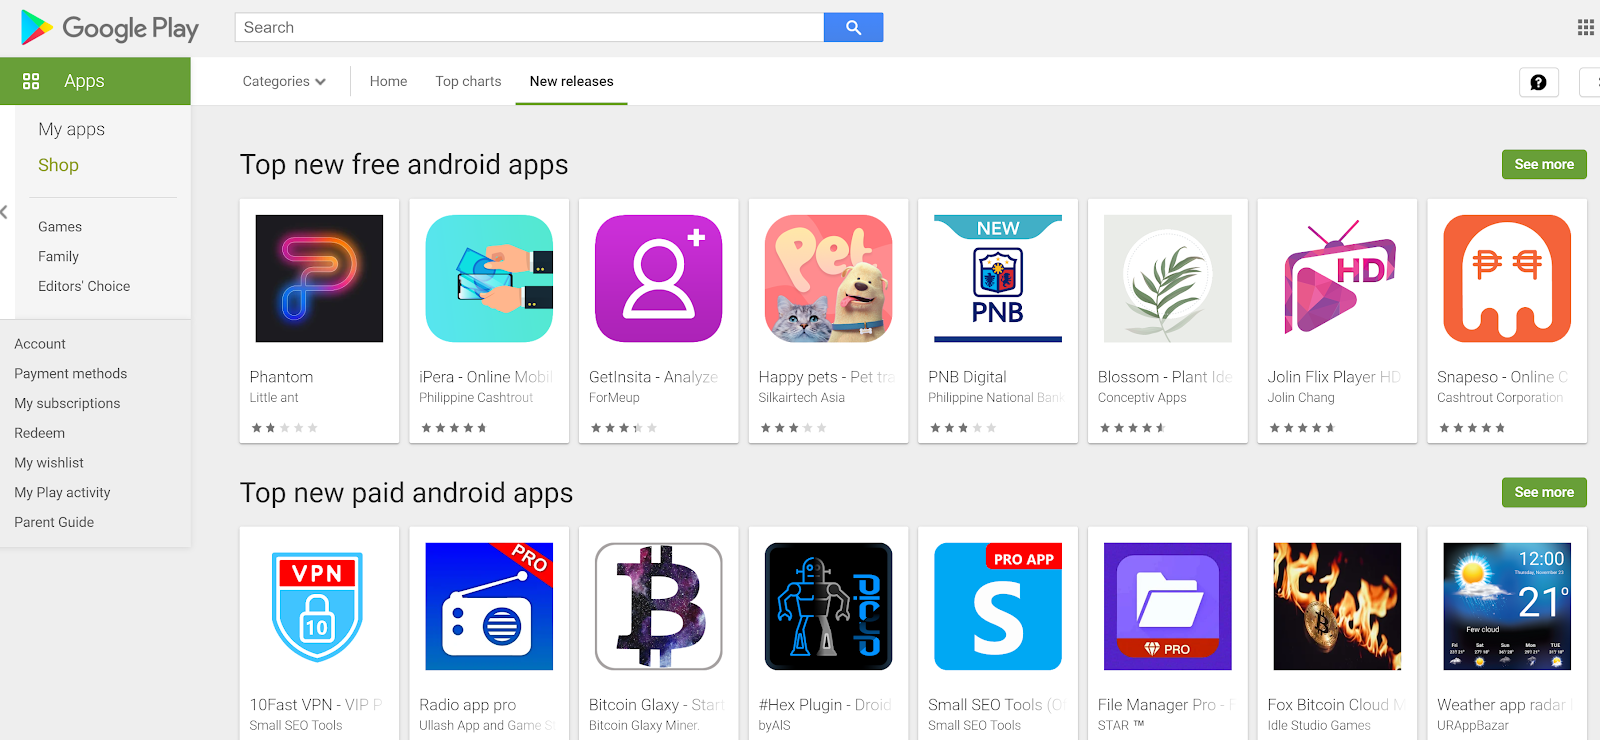 Image of top new free android apps and top new paid android apps for app downloads are dropping.